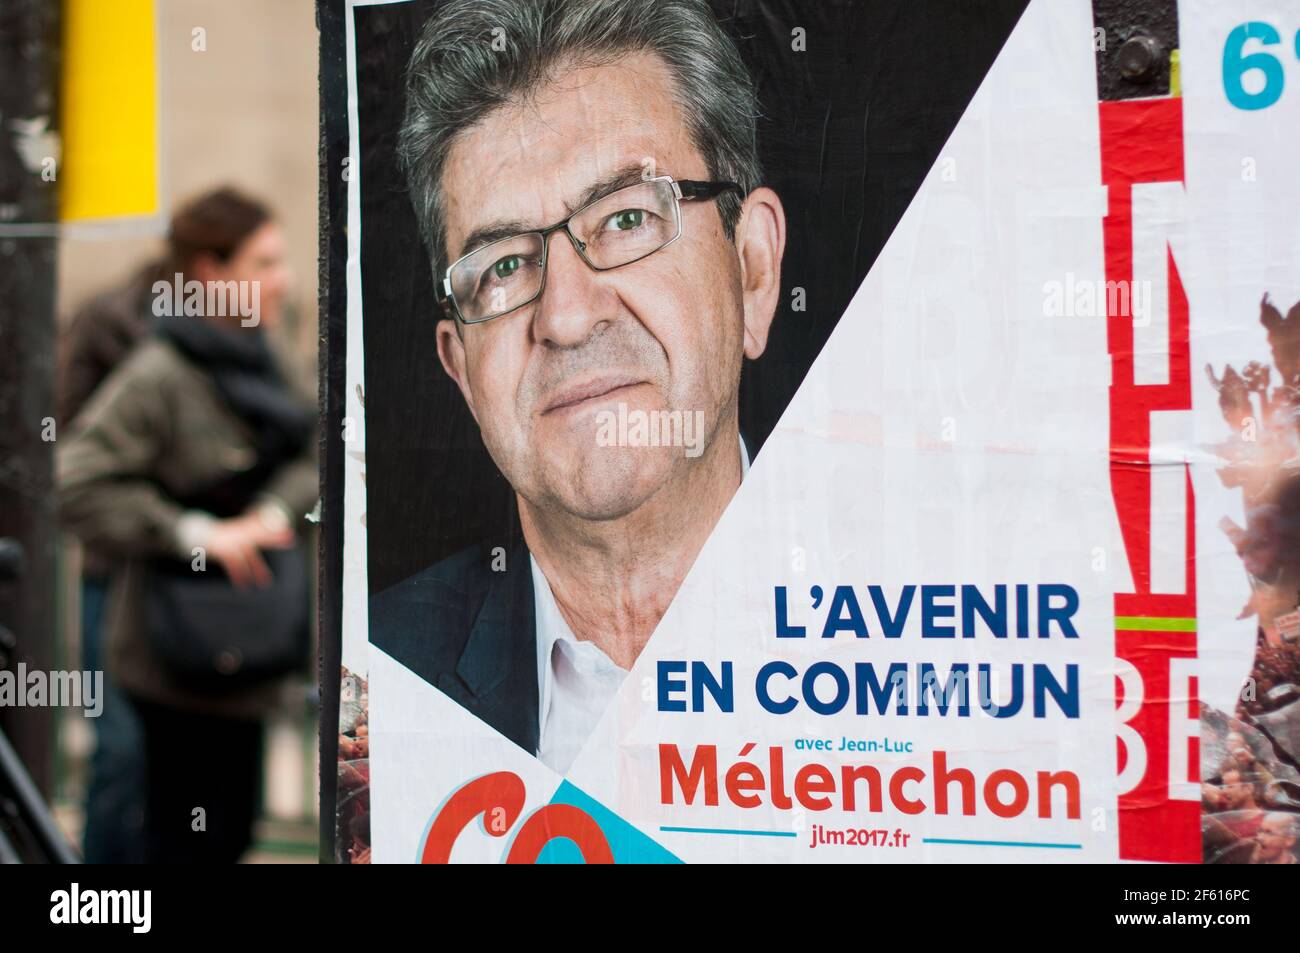 PARIS, FRANCE - MARCH 28, 2017 : Jean-Luc Mélenchon campaign poster for french presidential election. Stock Photo